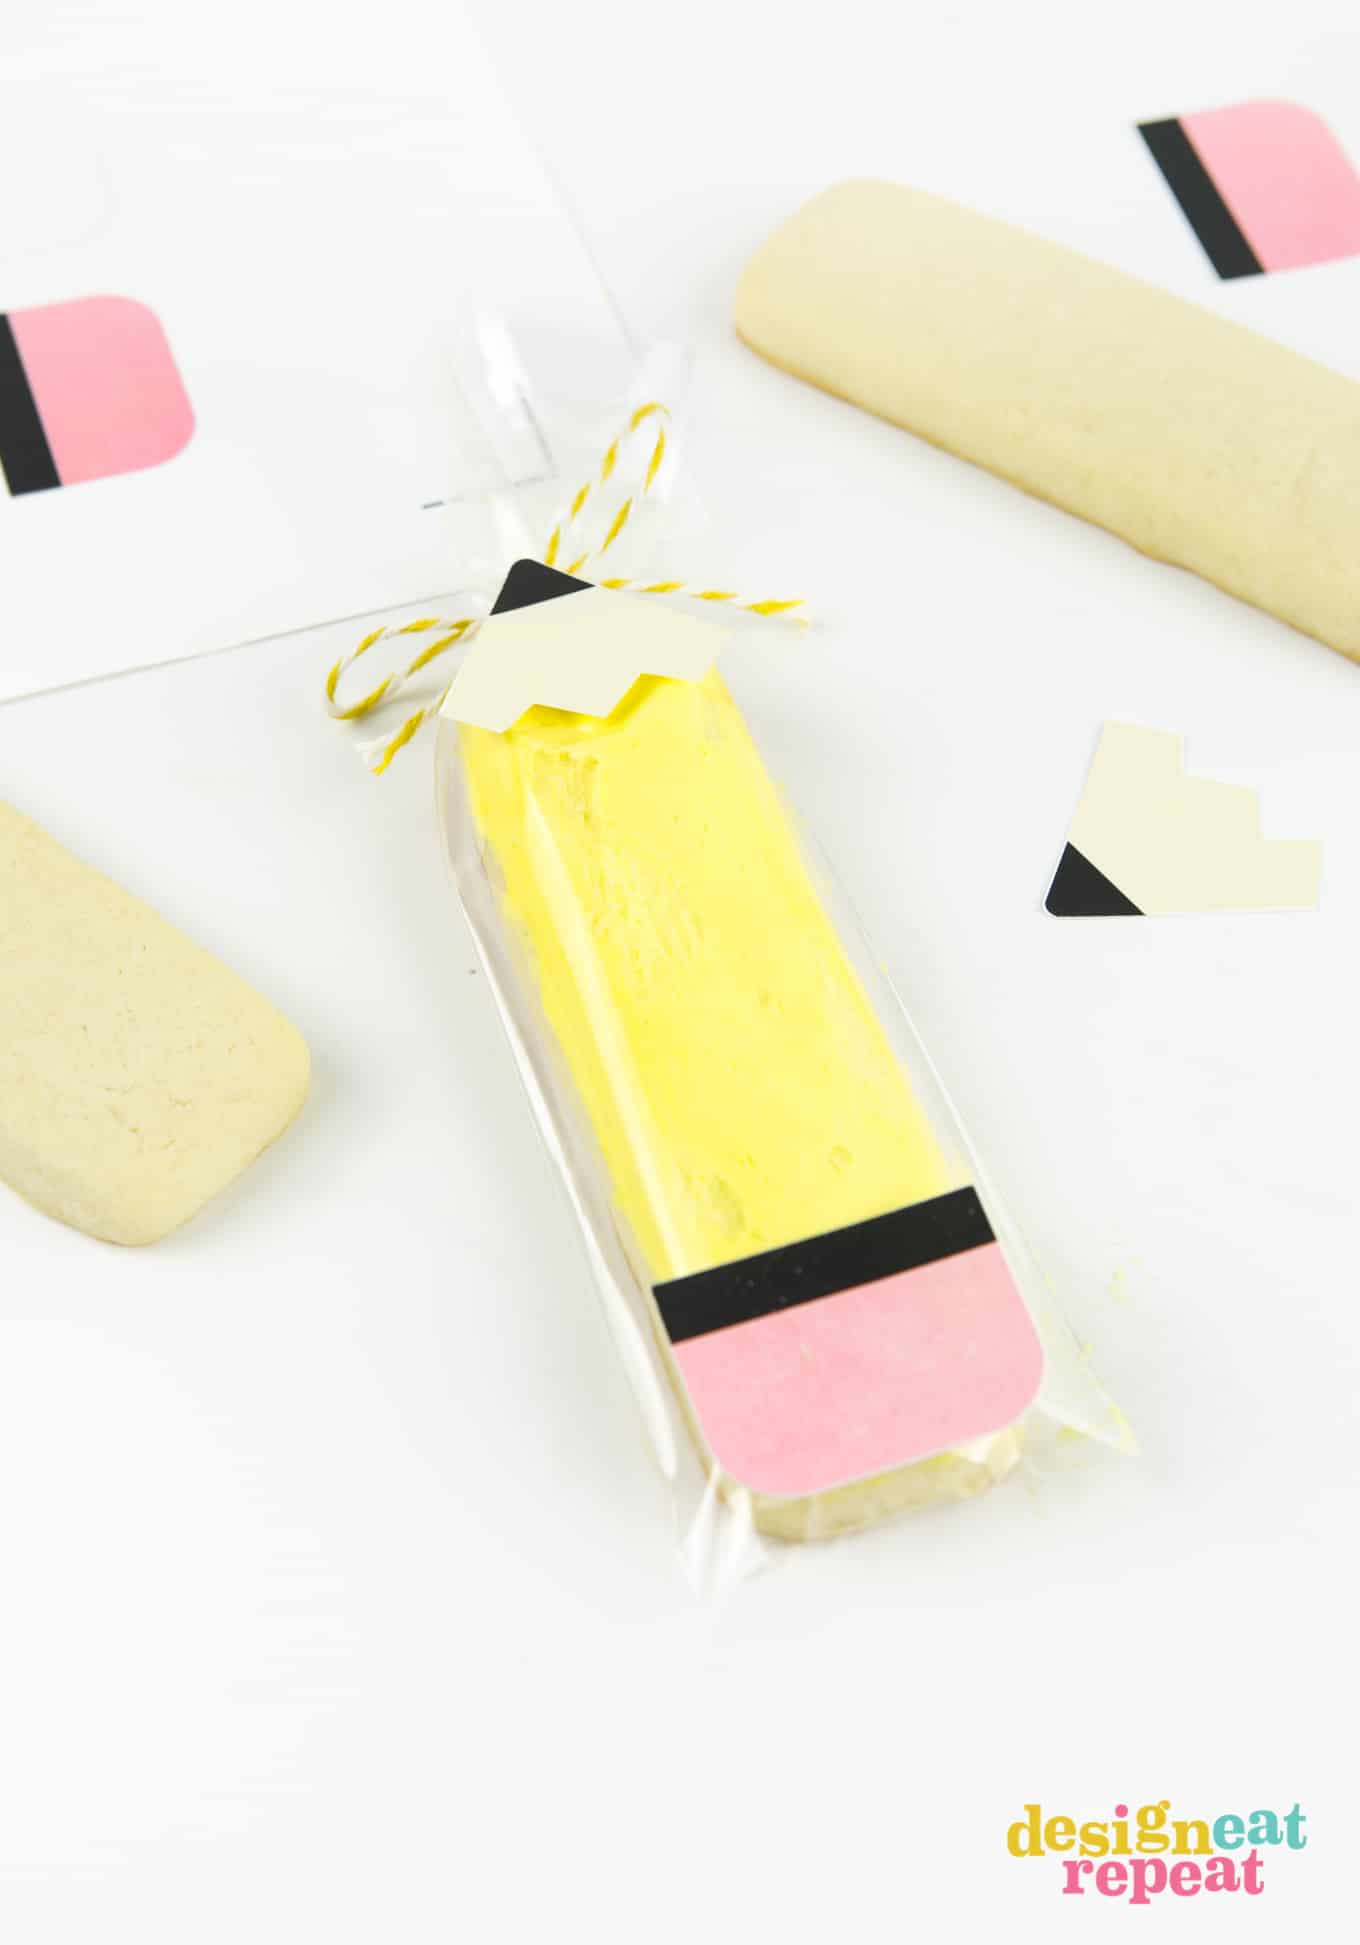 Yellow sugar cookie stick inside clear bag and decorated like pencil using printables.